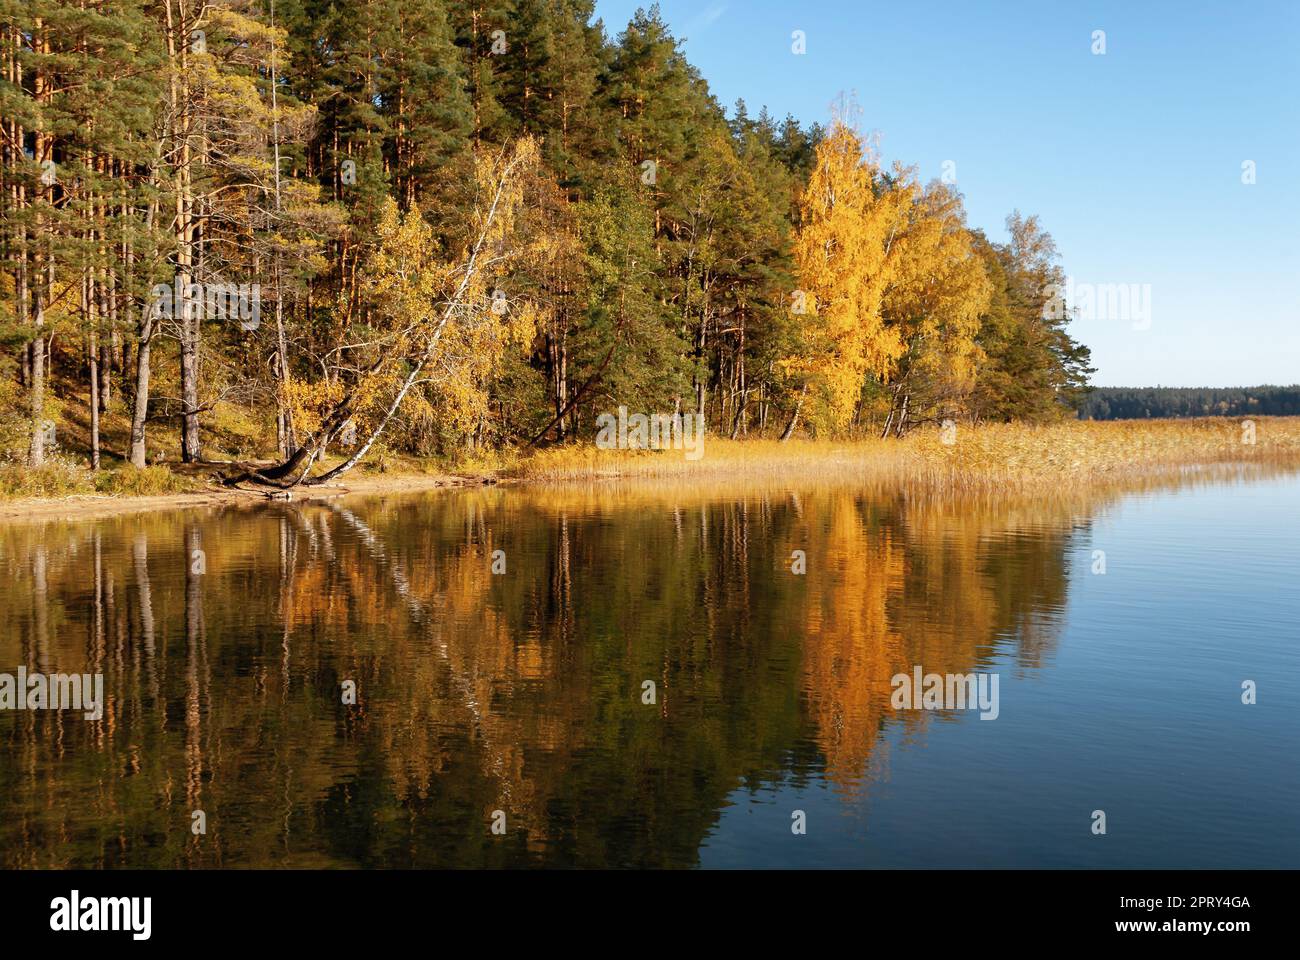 Autumn forest on the shore of Lake Baltieji Lakajai in Labanoras Regional Park, Lithuania, reflected in the water. Stock Photo